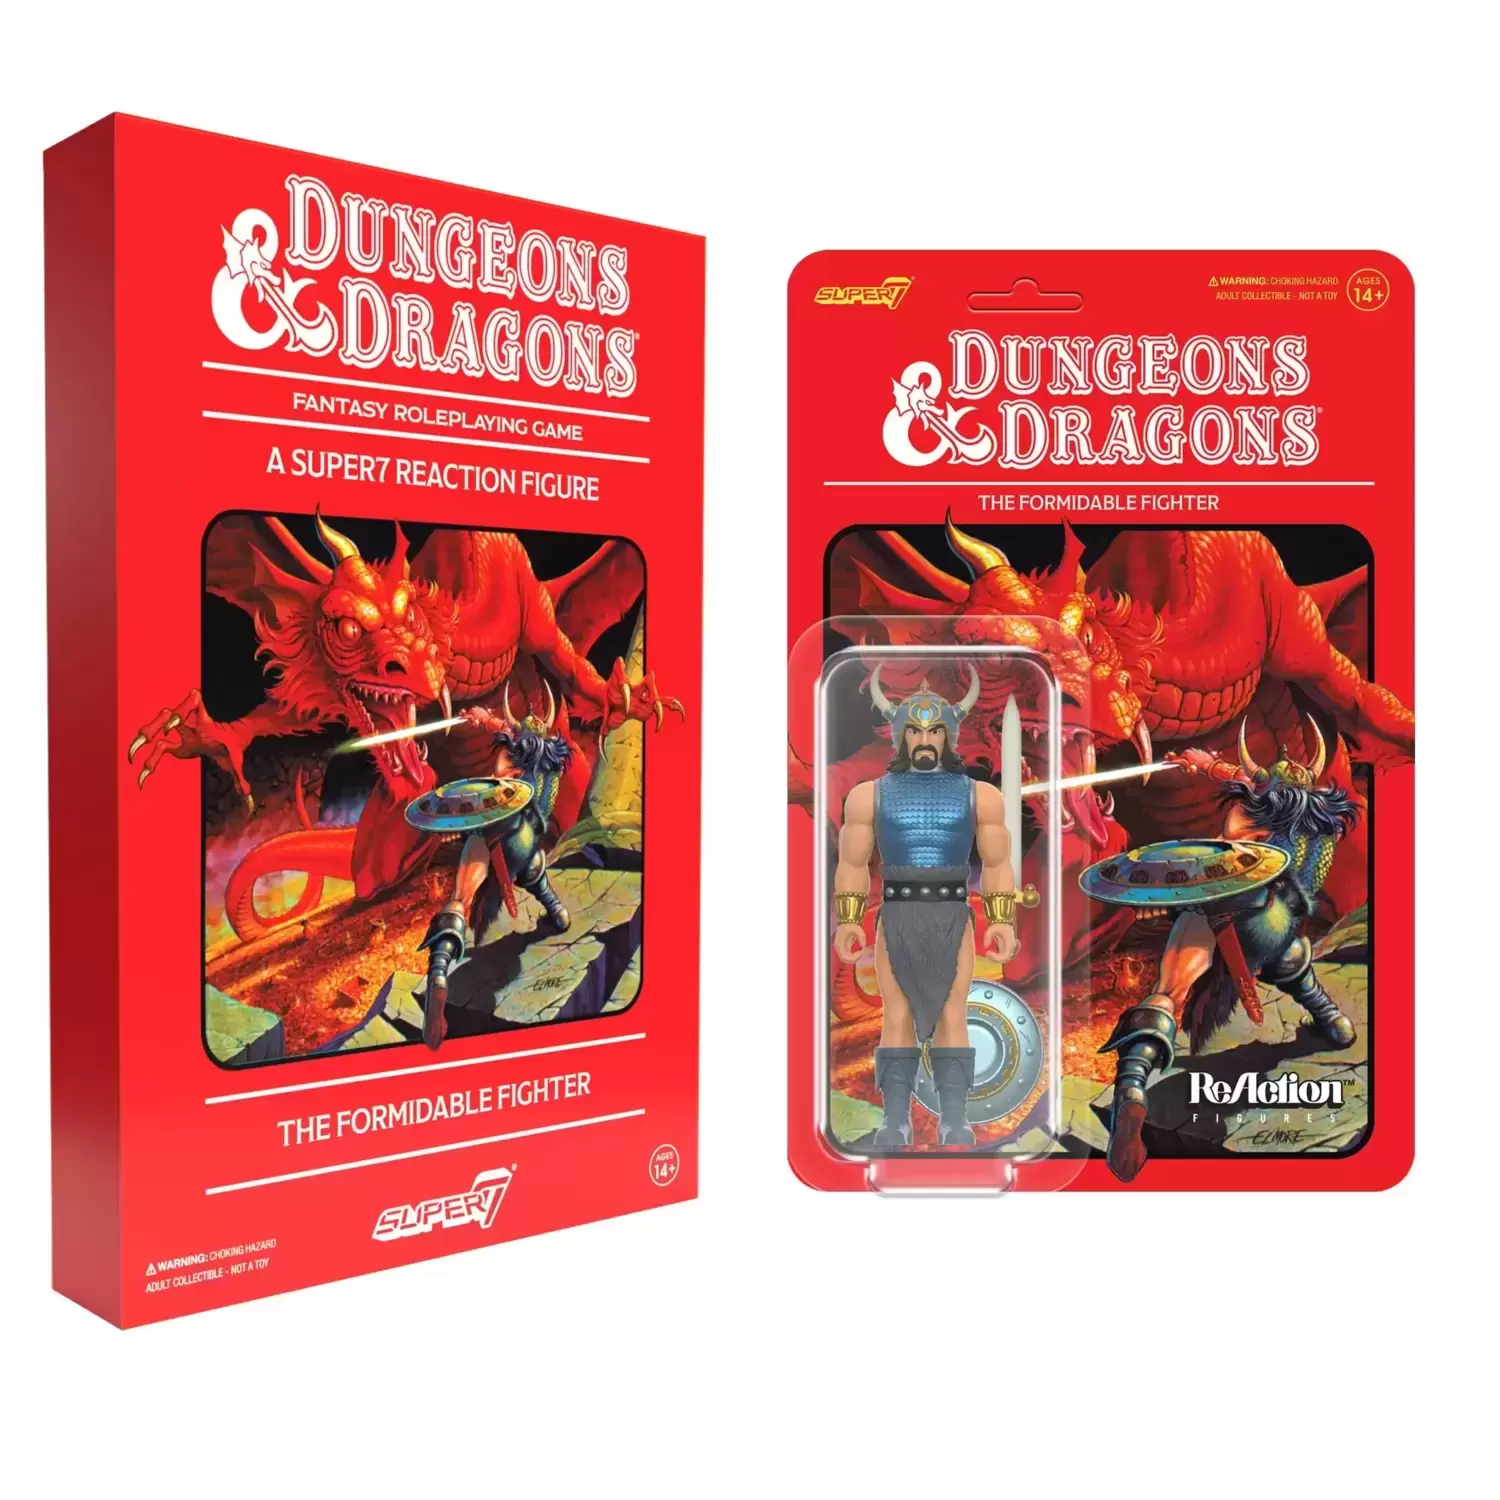 ReAction Figures - Dungeons & Dragons - The Formidable Fighter